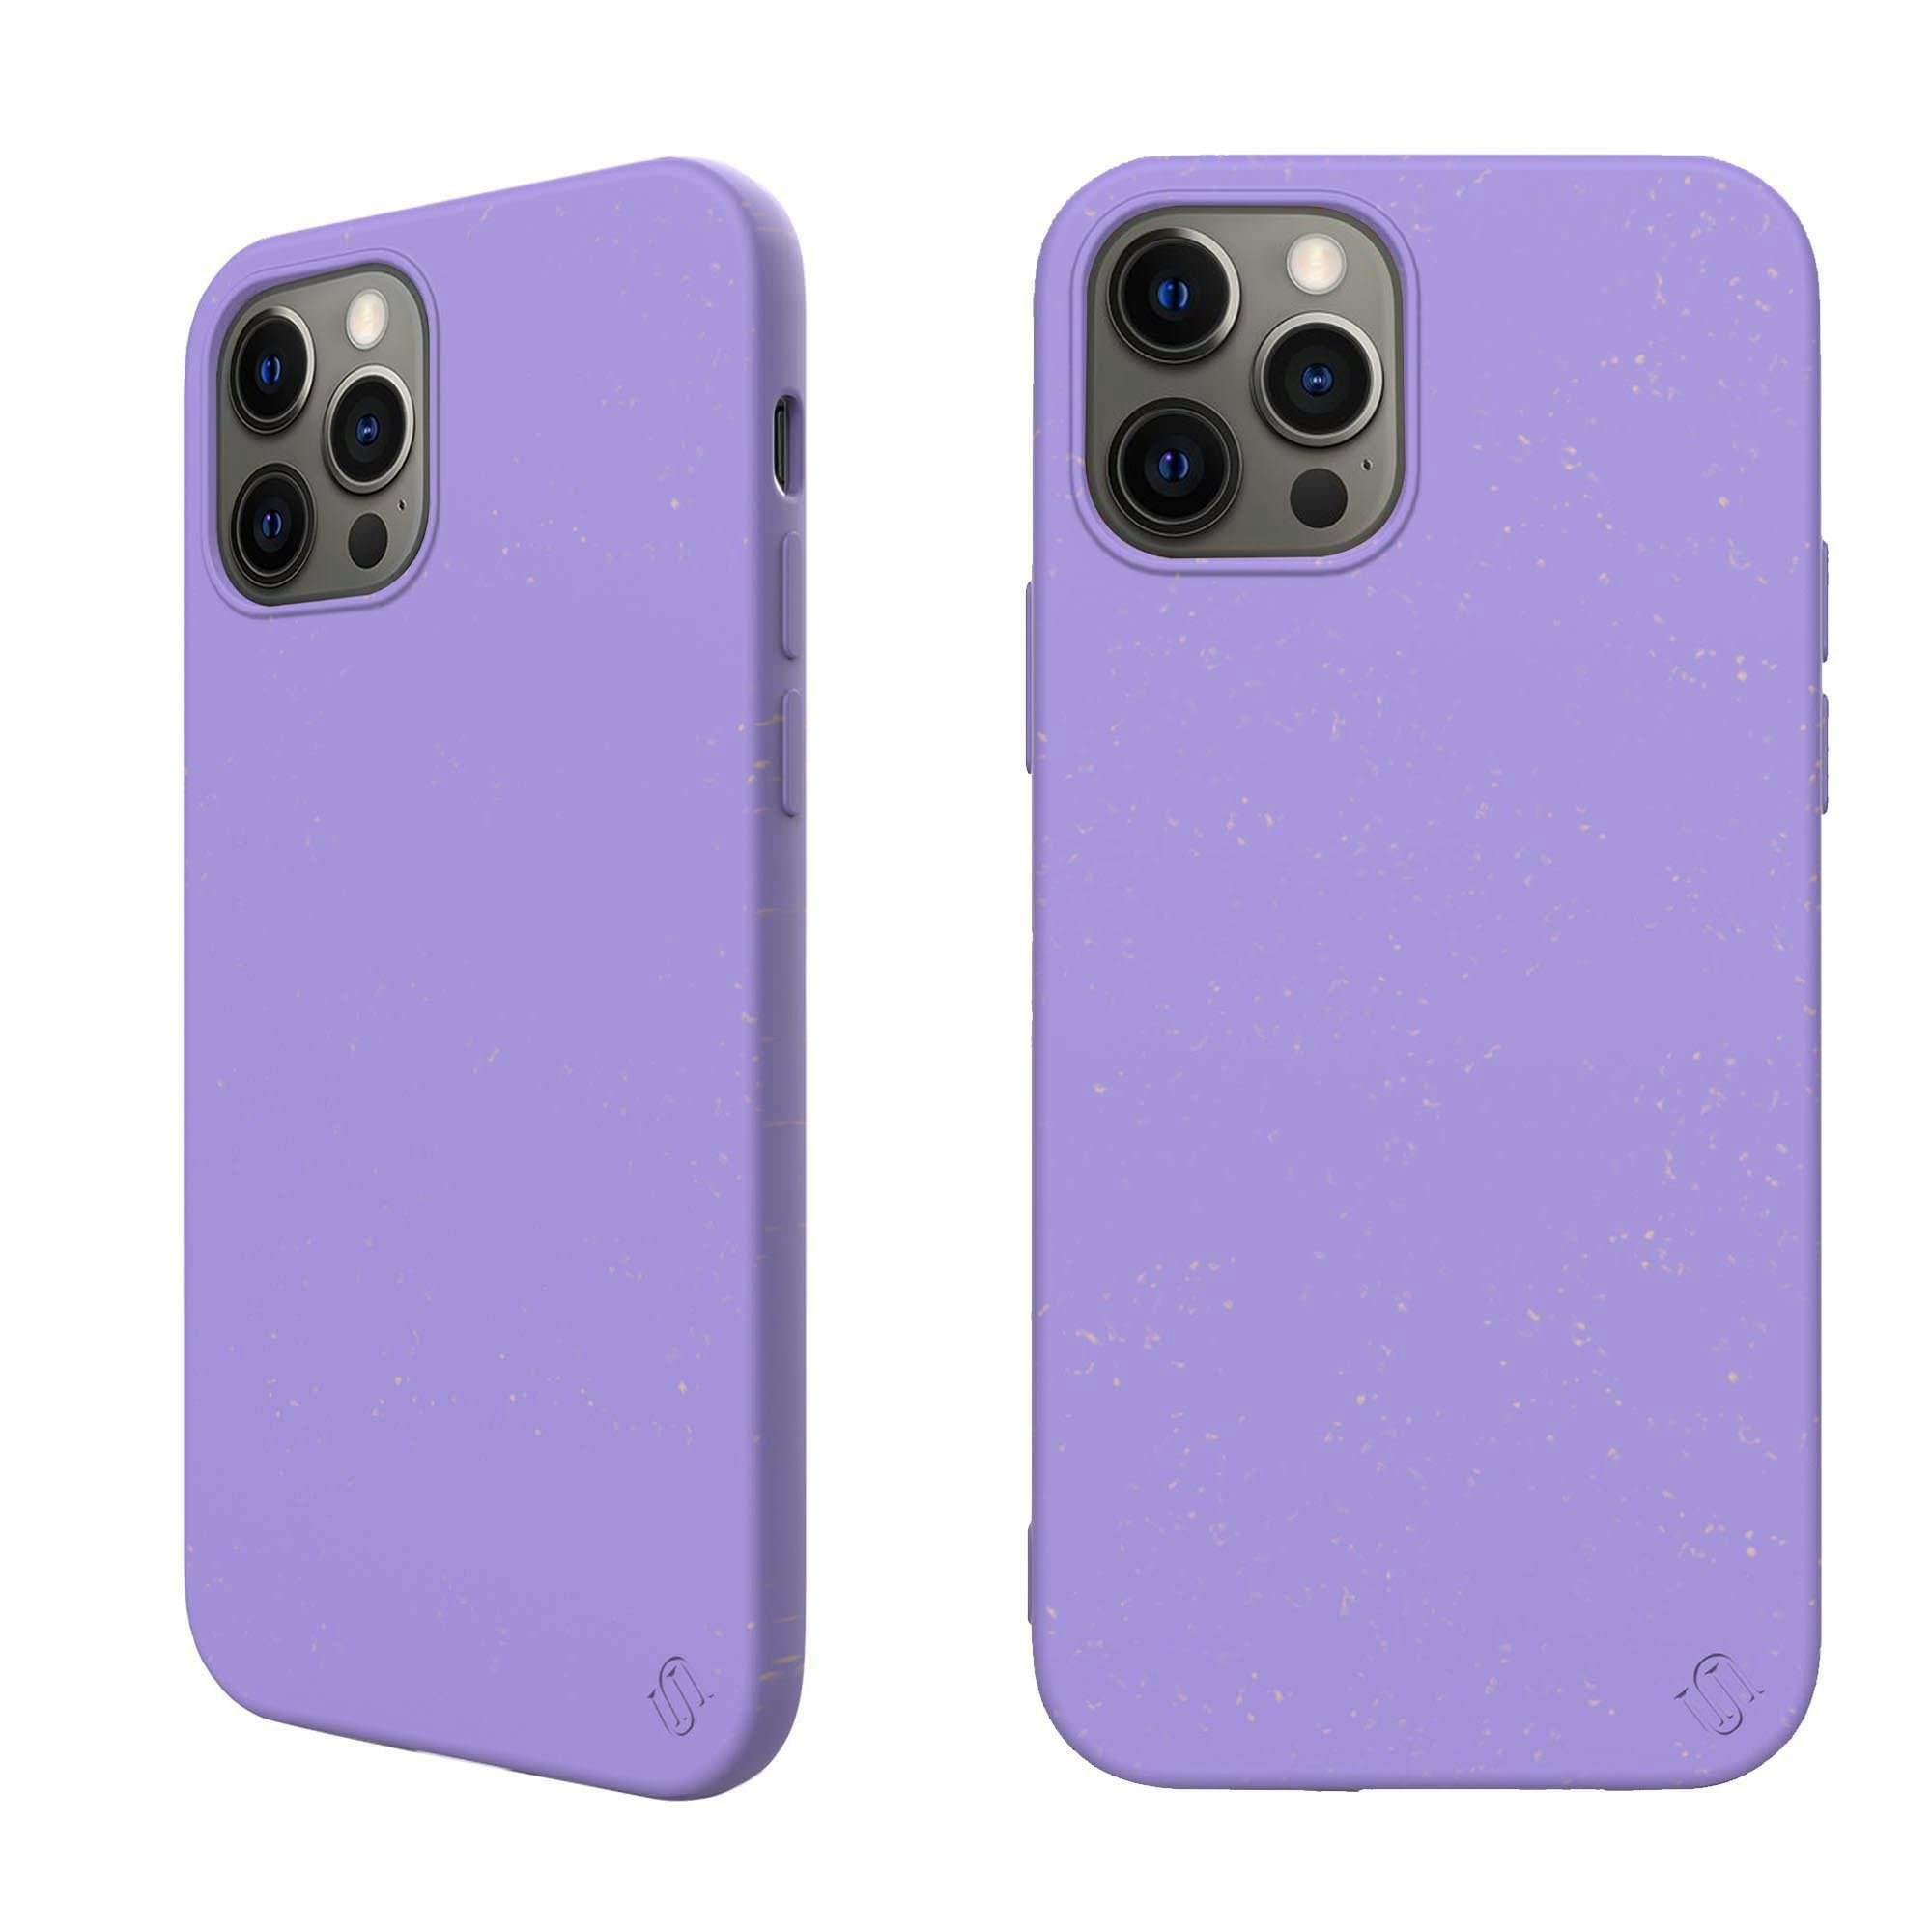 Home Electronics Phone Cases Apple Eco Friendly Purple Iphone 12 Pro Max Case